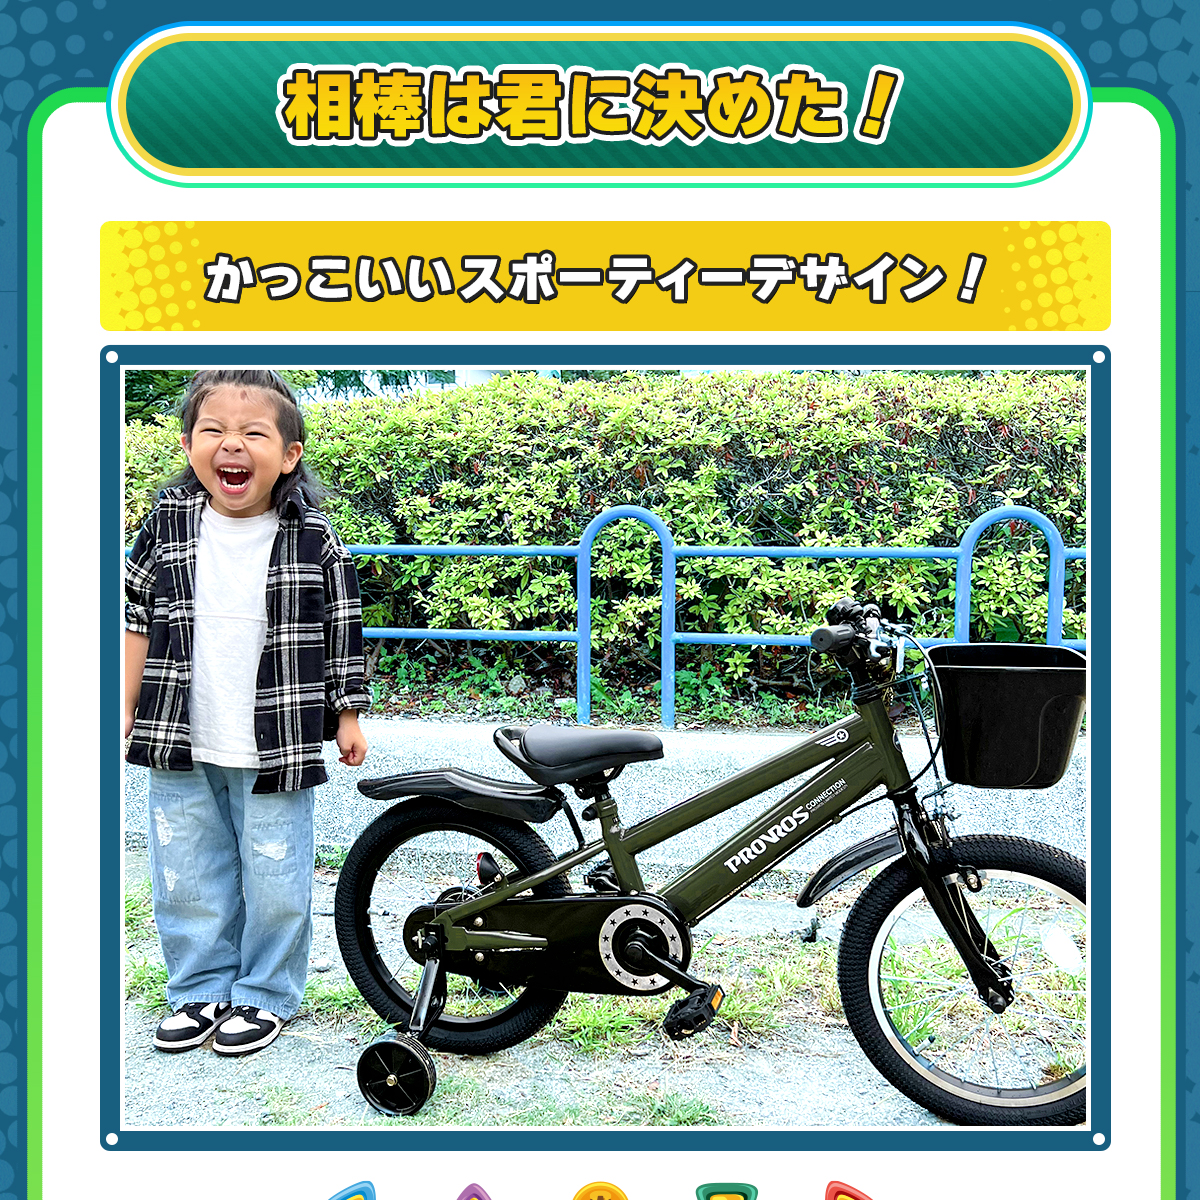 PROVROS 子供用自転車 補助輪付き 16インチ キッズ 幼児 4歳 5歳 6歳 カゴ ギフト 男の子 お祝い 誕生日 クリスマス PKM-16｜procycle｜12